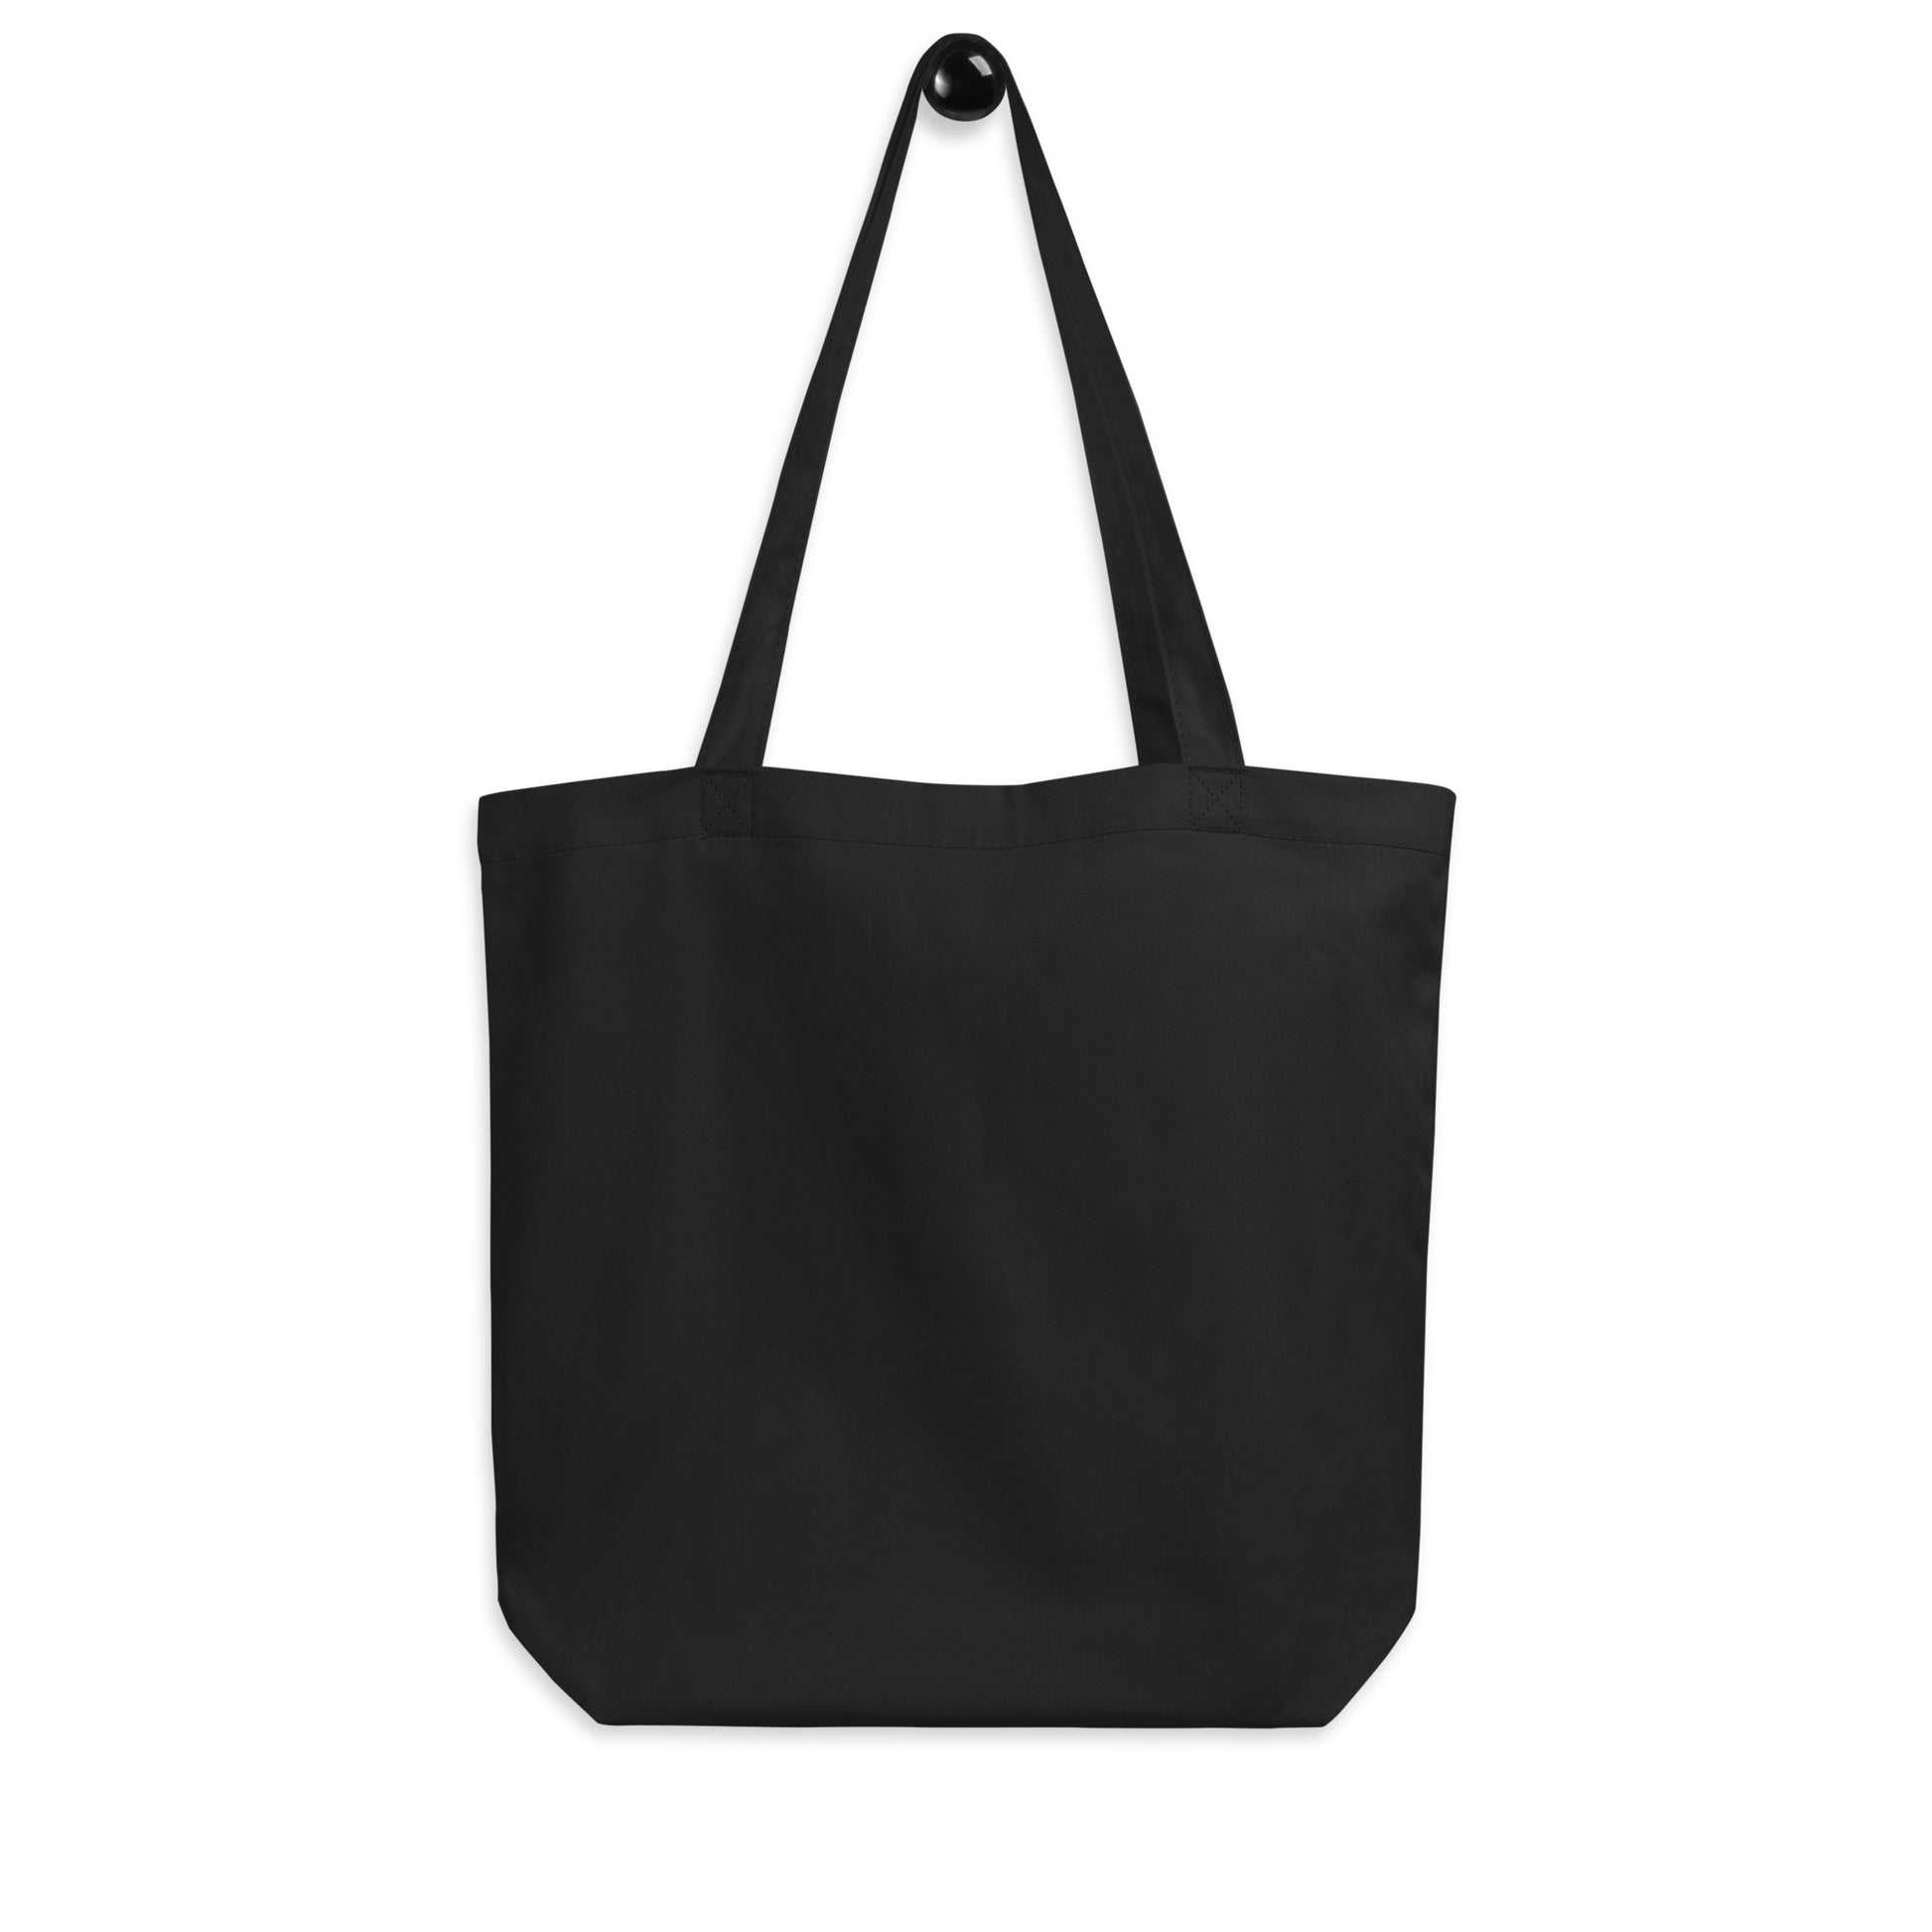 Unique Travel Gift Organic Tote - White Oval • SAN San Diego • YHM Designs - Image 05